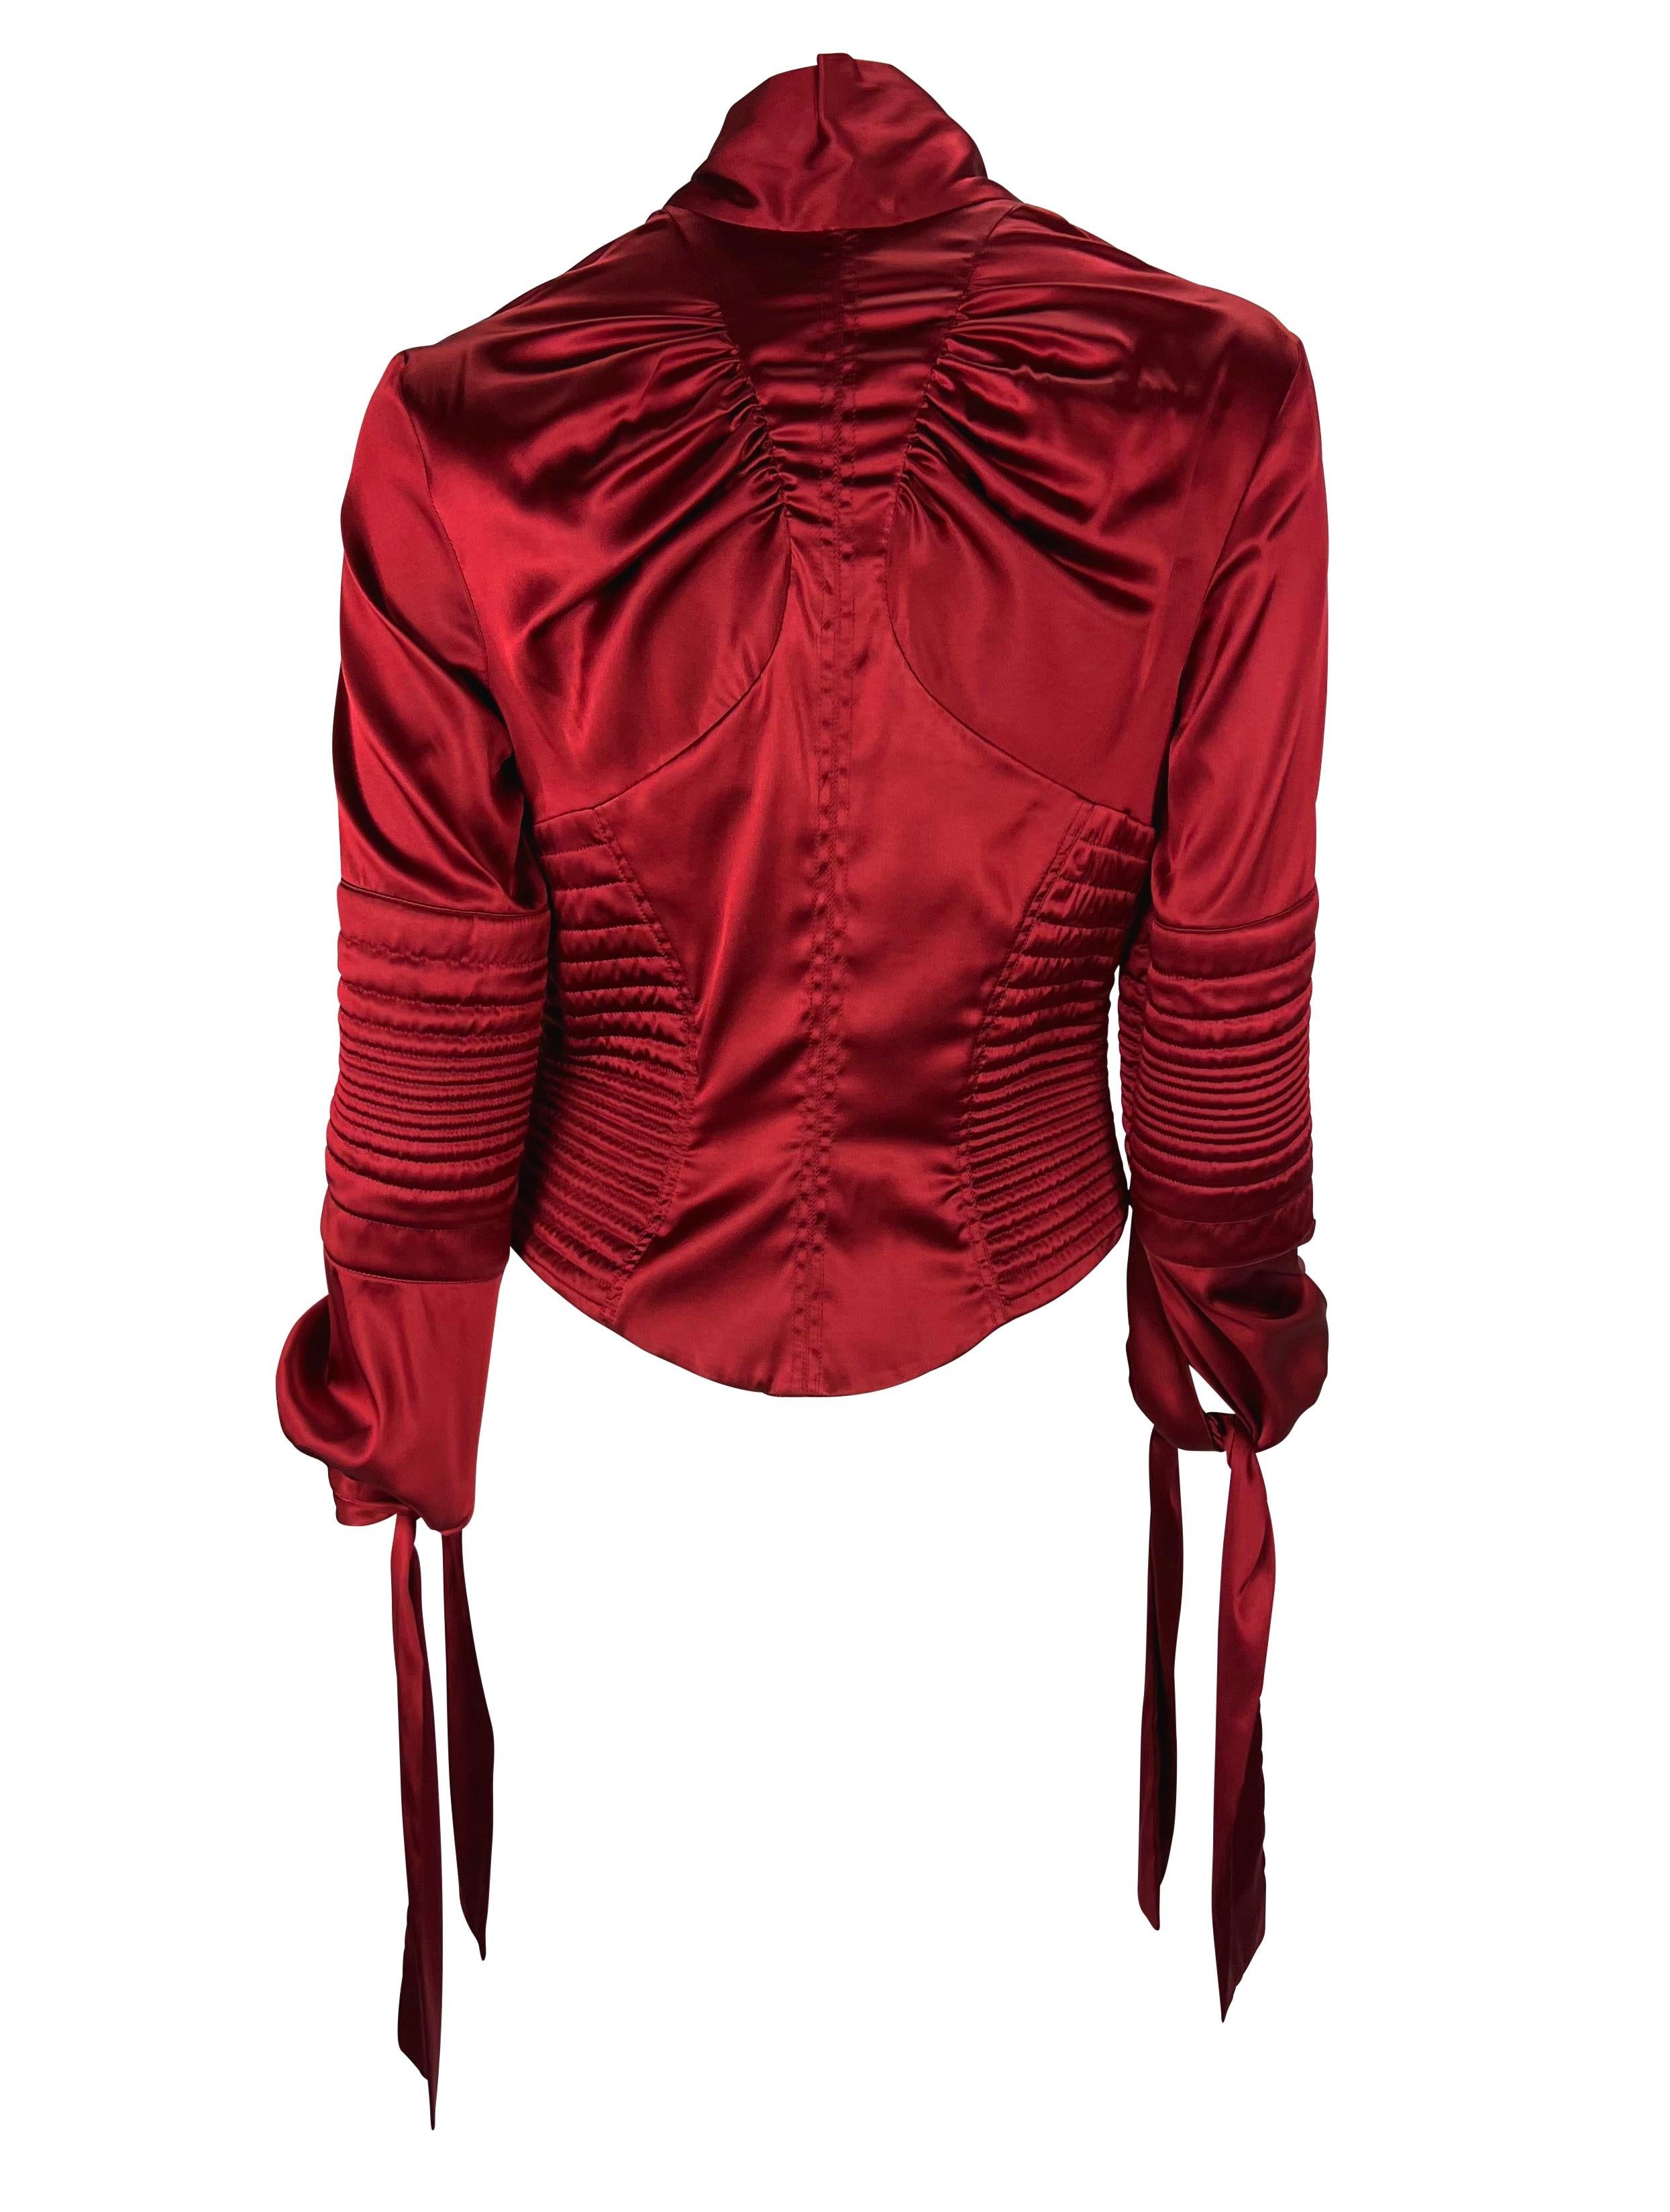 Women's NWT F/W 2003 Gucci by Tom Ford Deep Red Stretch Satin Quilted Corset Tie Blouse For Sale